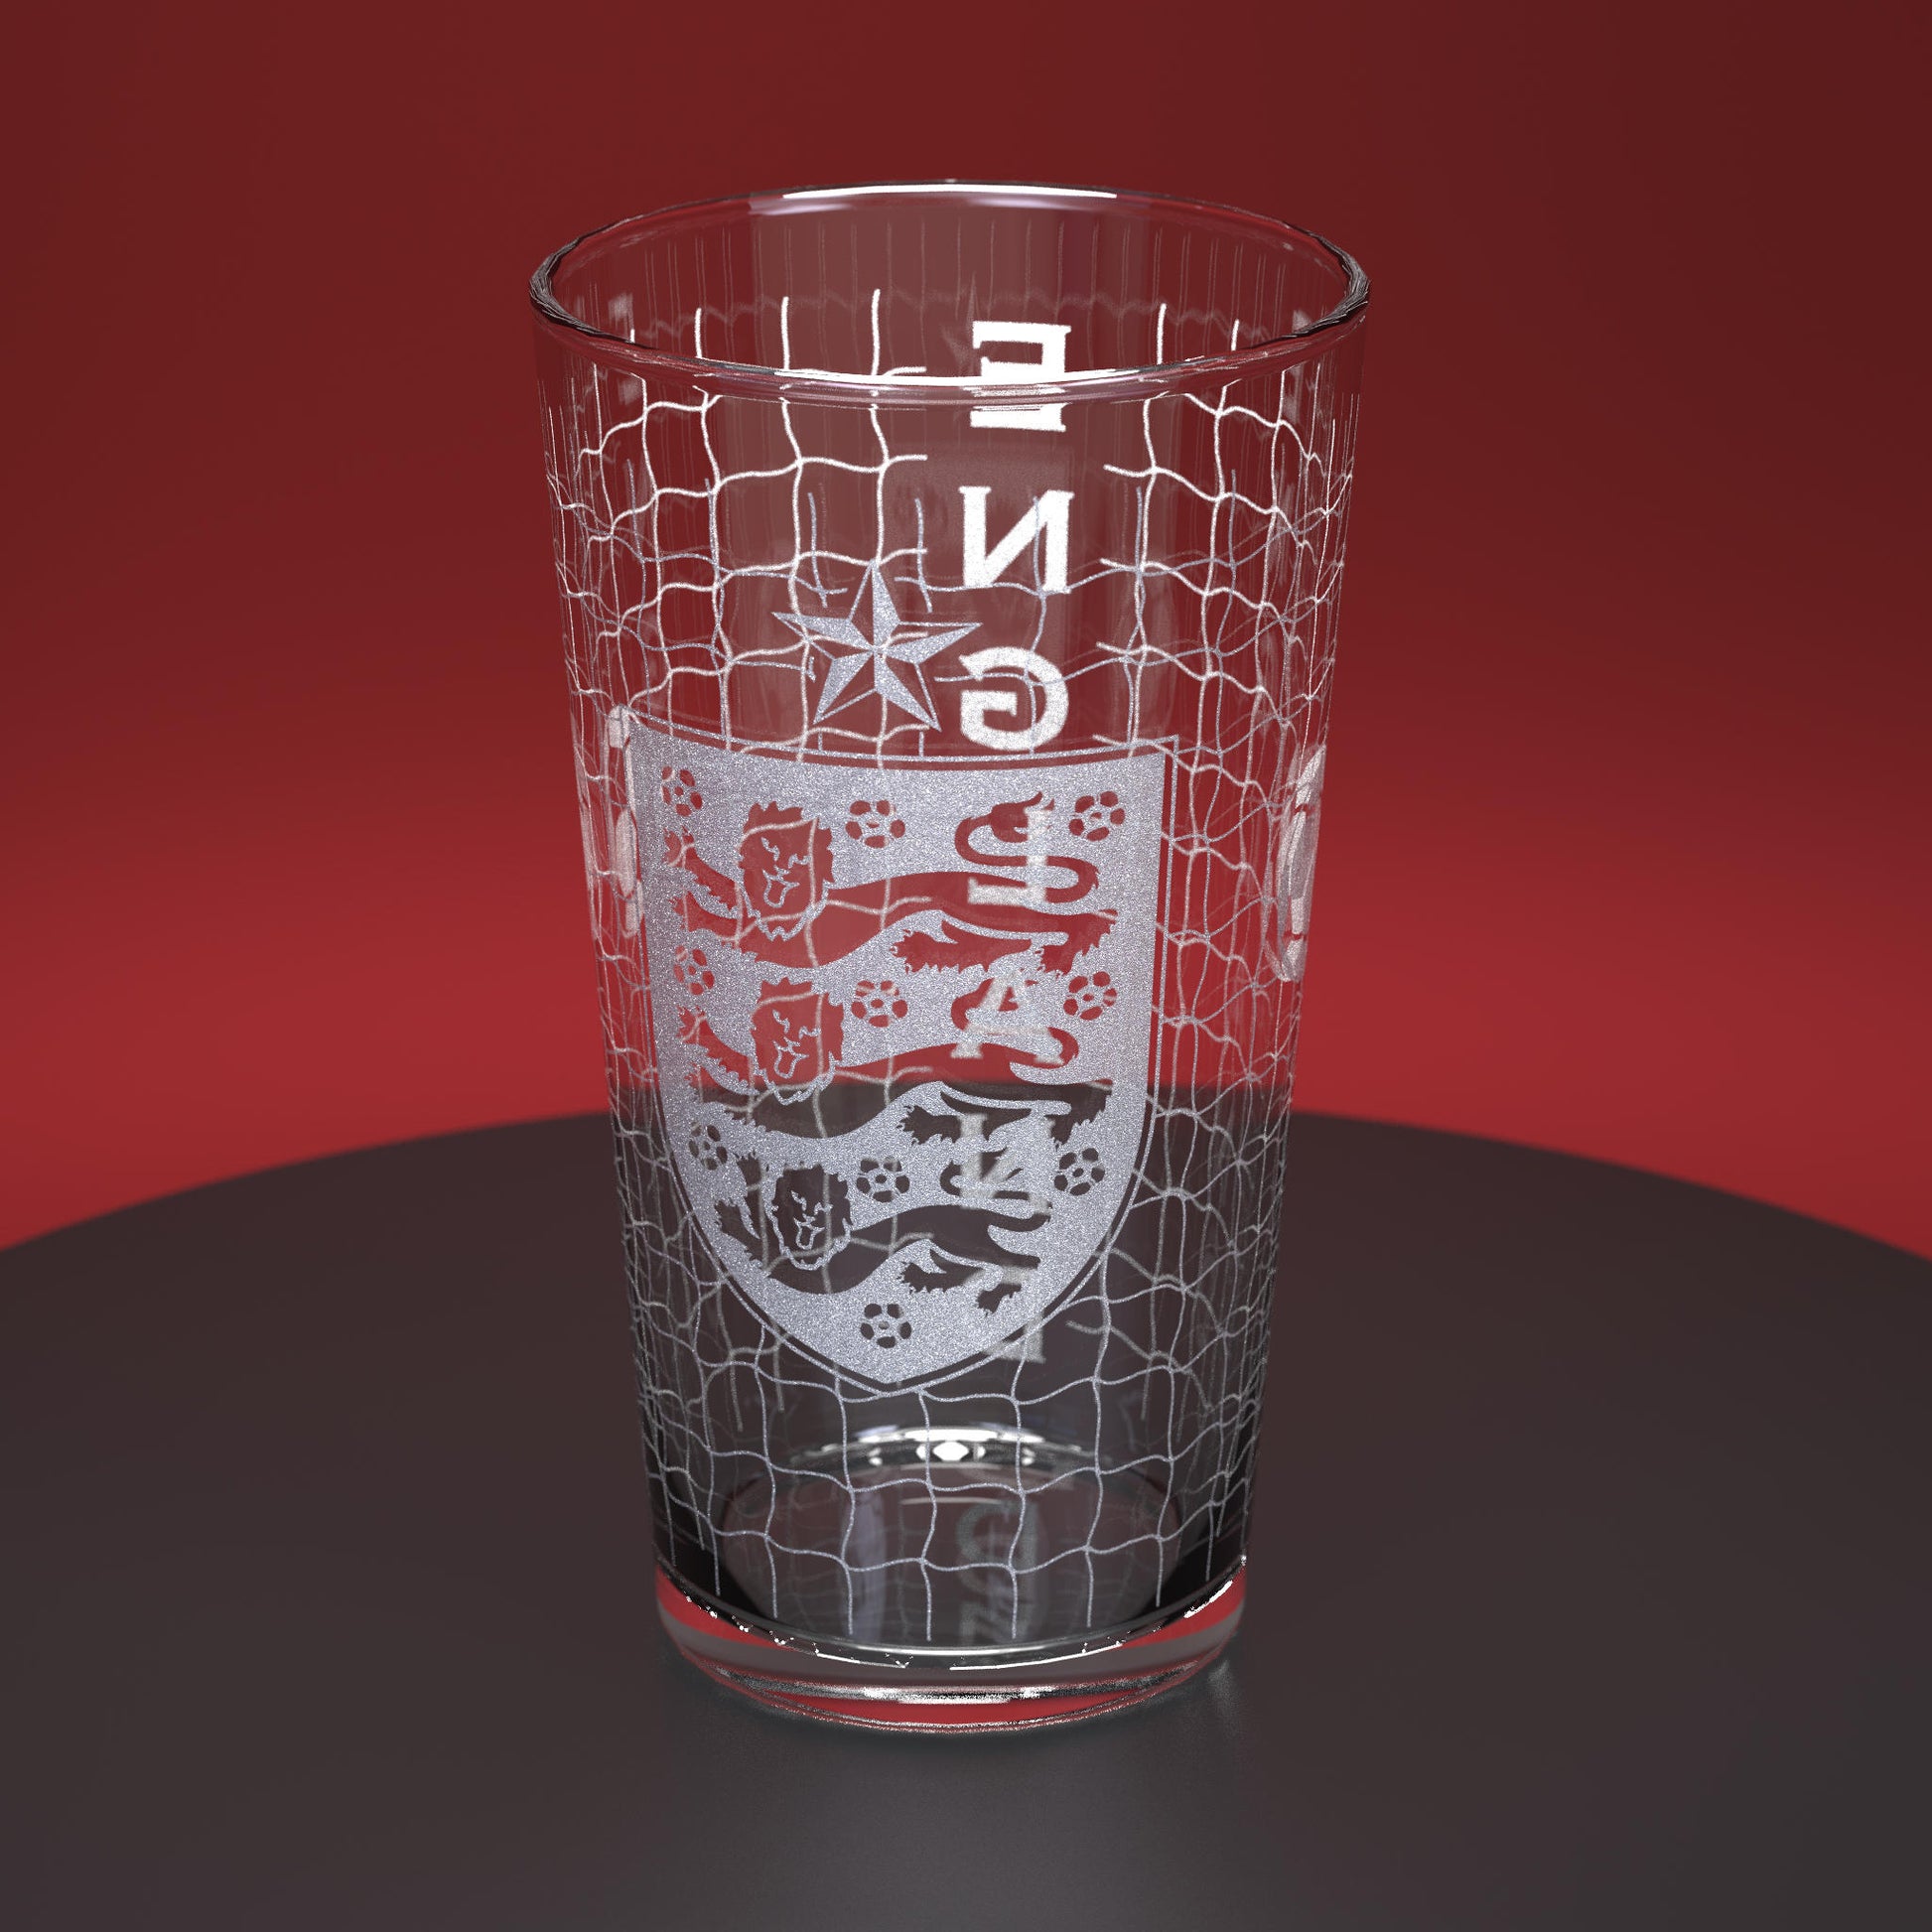 Pint glass engraved with England Football logo and net design